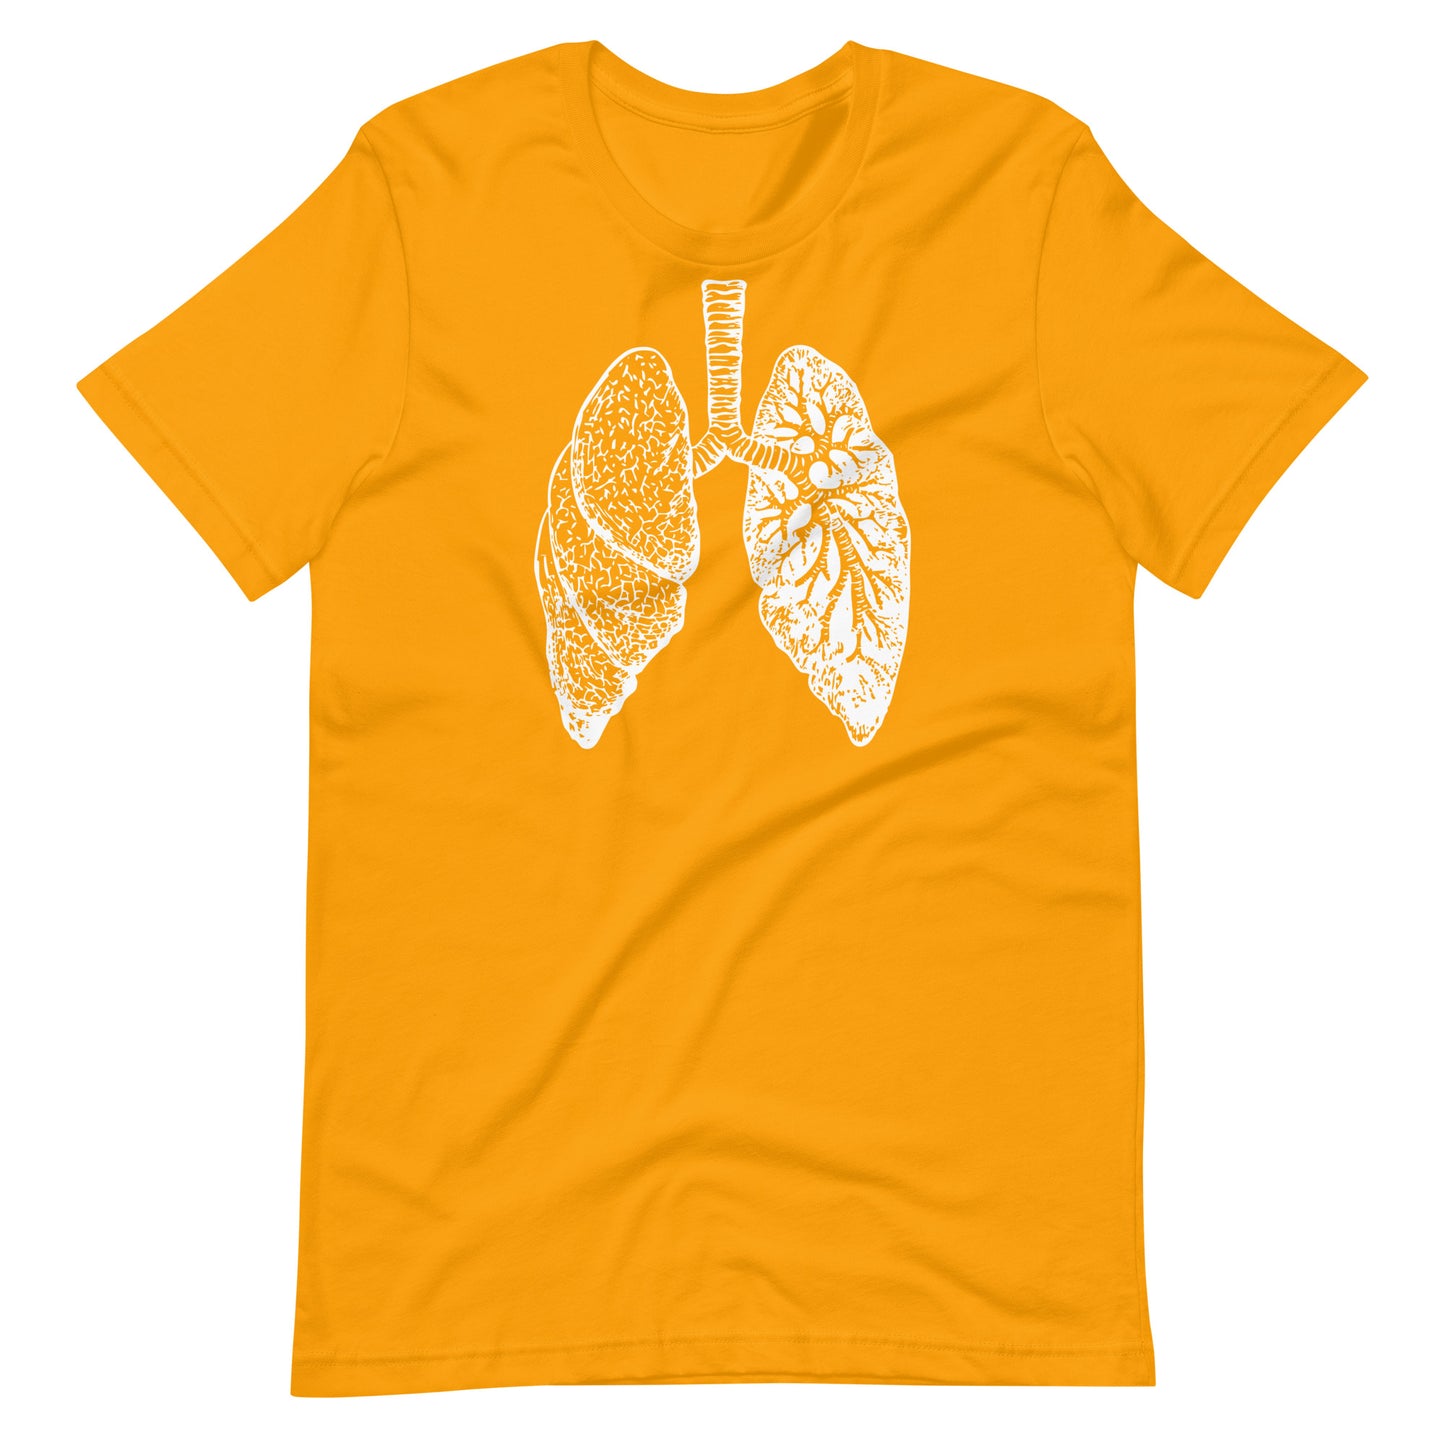 Graphic Tee, Lungs, Pulmonary, Funny Doctor Shirt, Medical Student, Funny Nurse Shirt, Funny Resident Shirt, Doctor, Physician, Resident, Nurse, PA, NP, Medical Student, Asthma, Pulmonary Fibrosis, Lung Cancer, Cystic Fibrosis